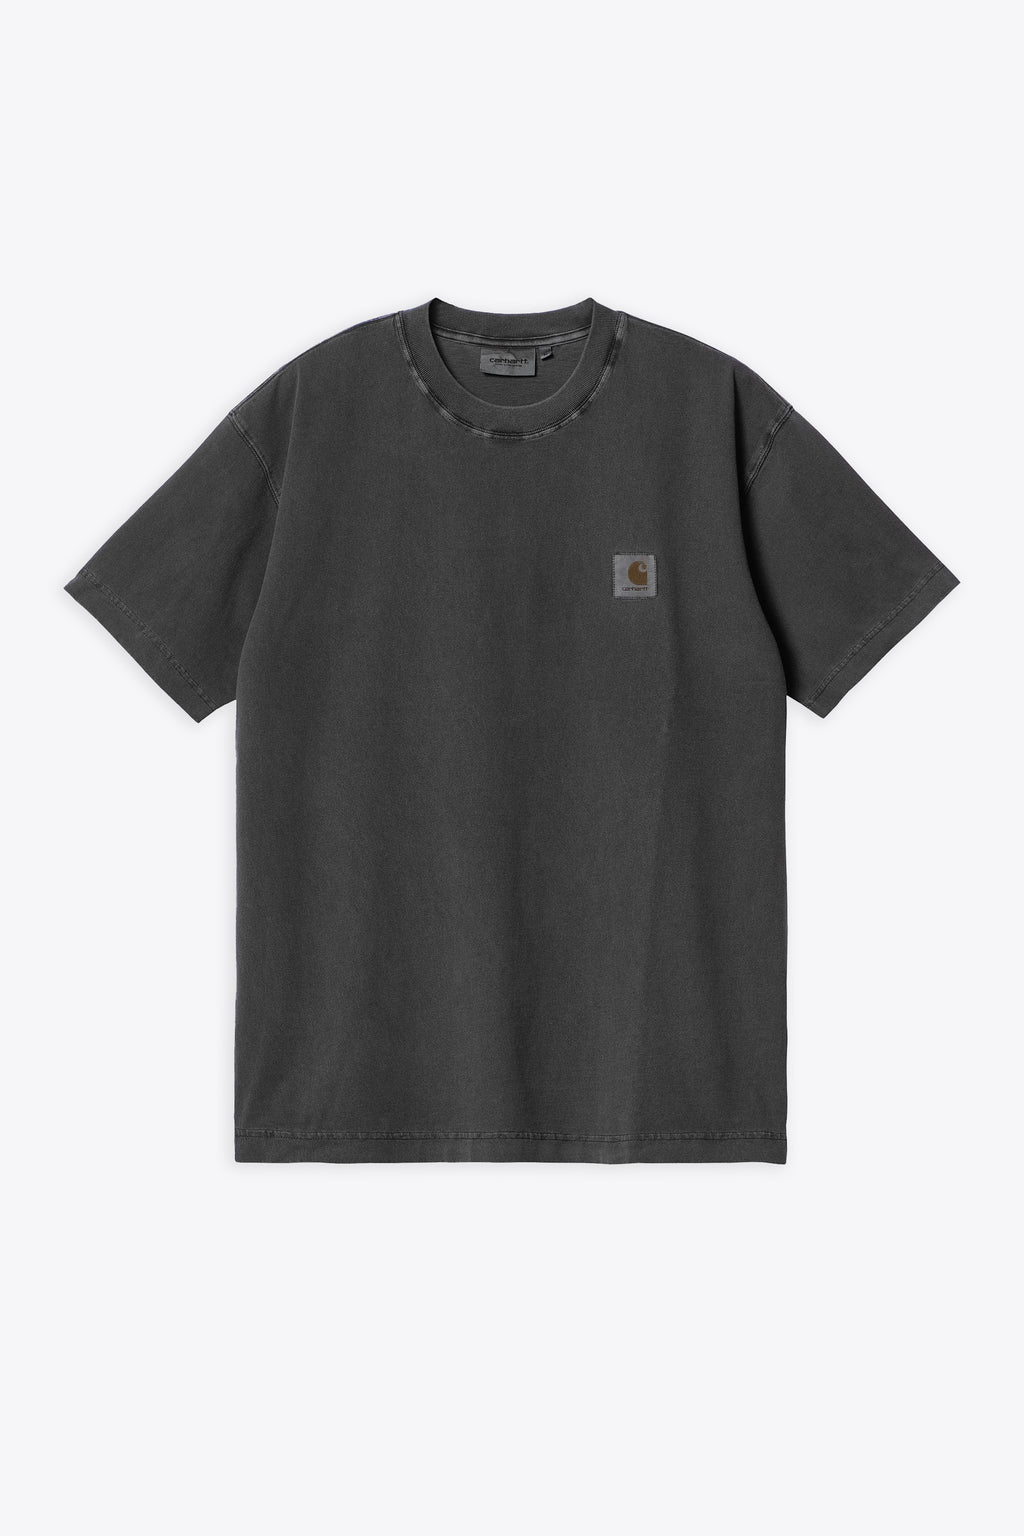 alt-image__Washed-charcoal-grey-cotton-t-shirt-with-chest-logo---S/S-Nelson-T-Shirt